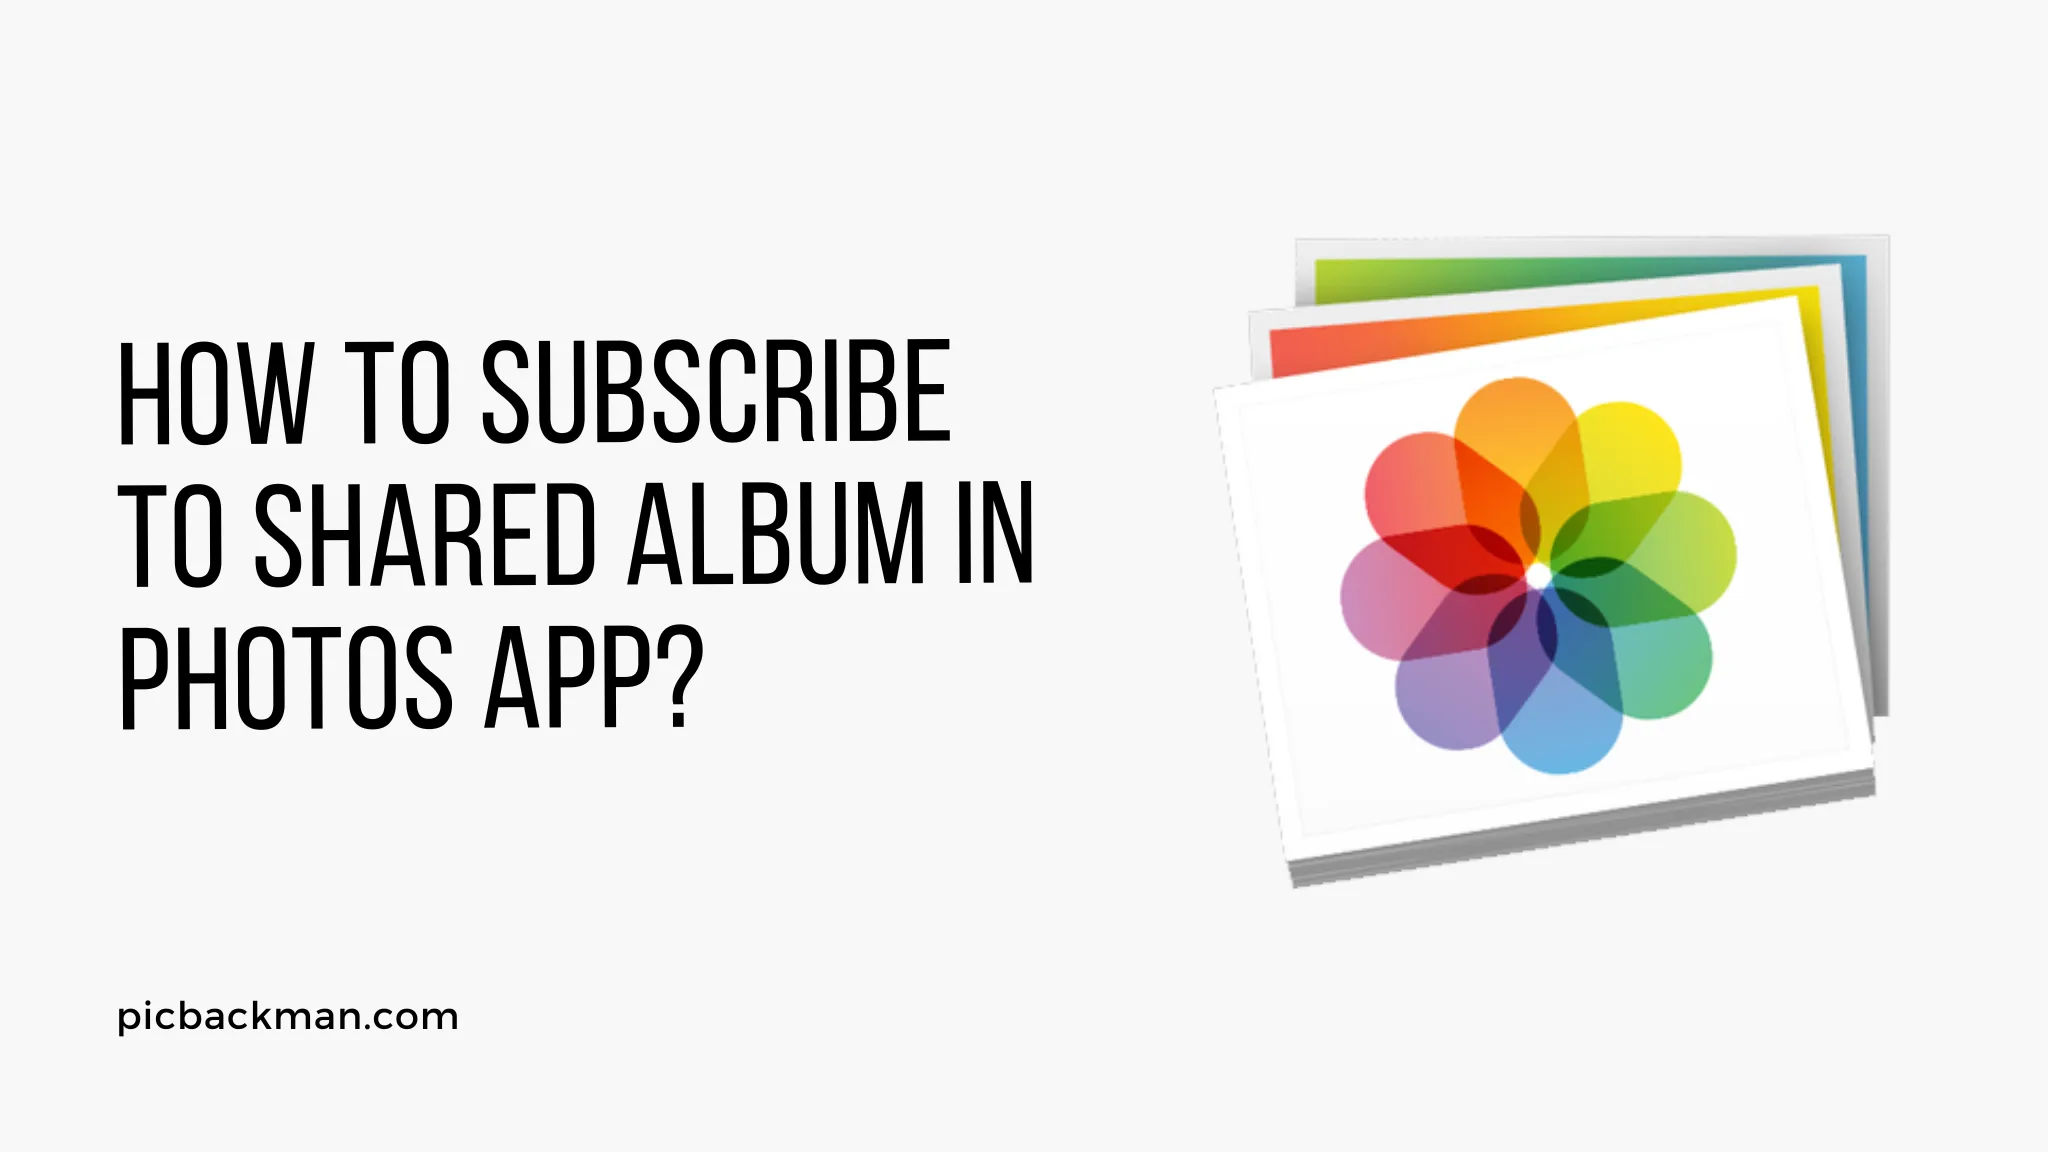 How to Subscribe to Shared Album in Photos App